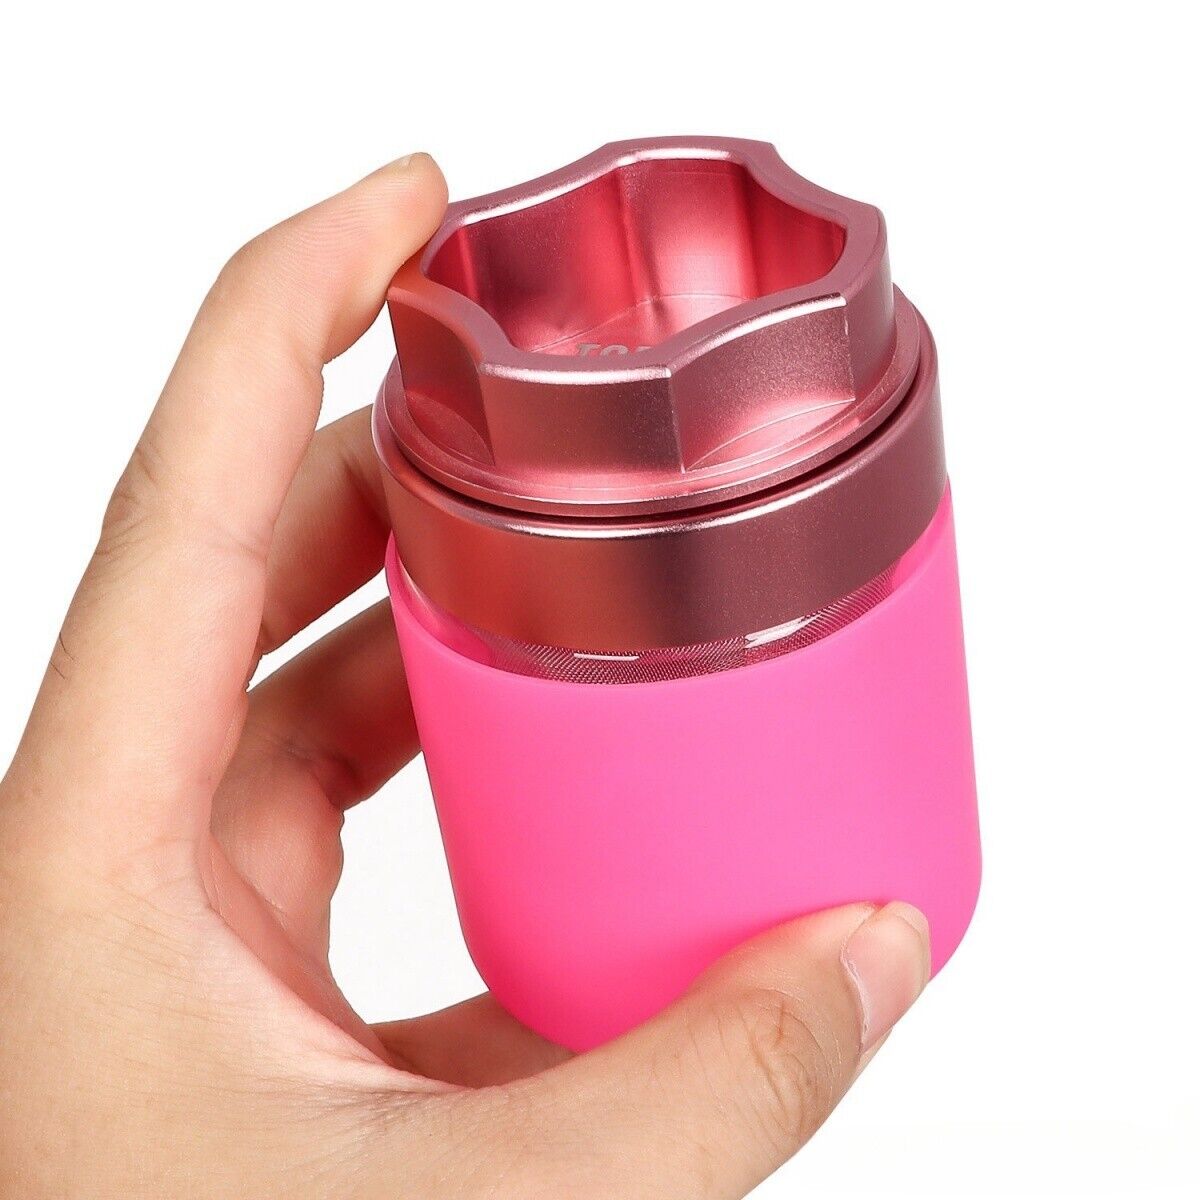 62mm 4-Layer Aluminum Alloy Grinder with Glass Storage Jar and Filter Red